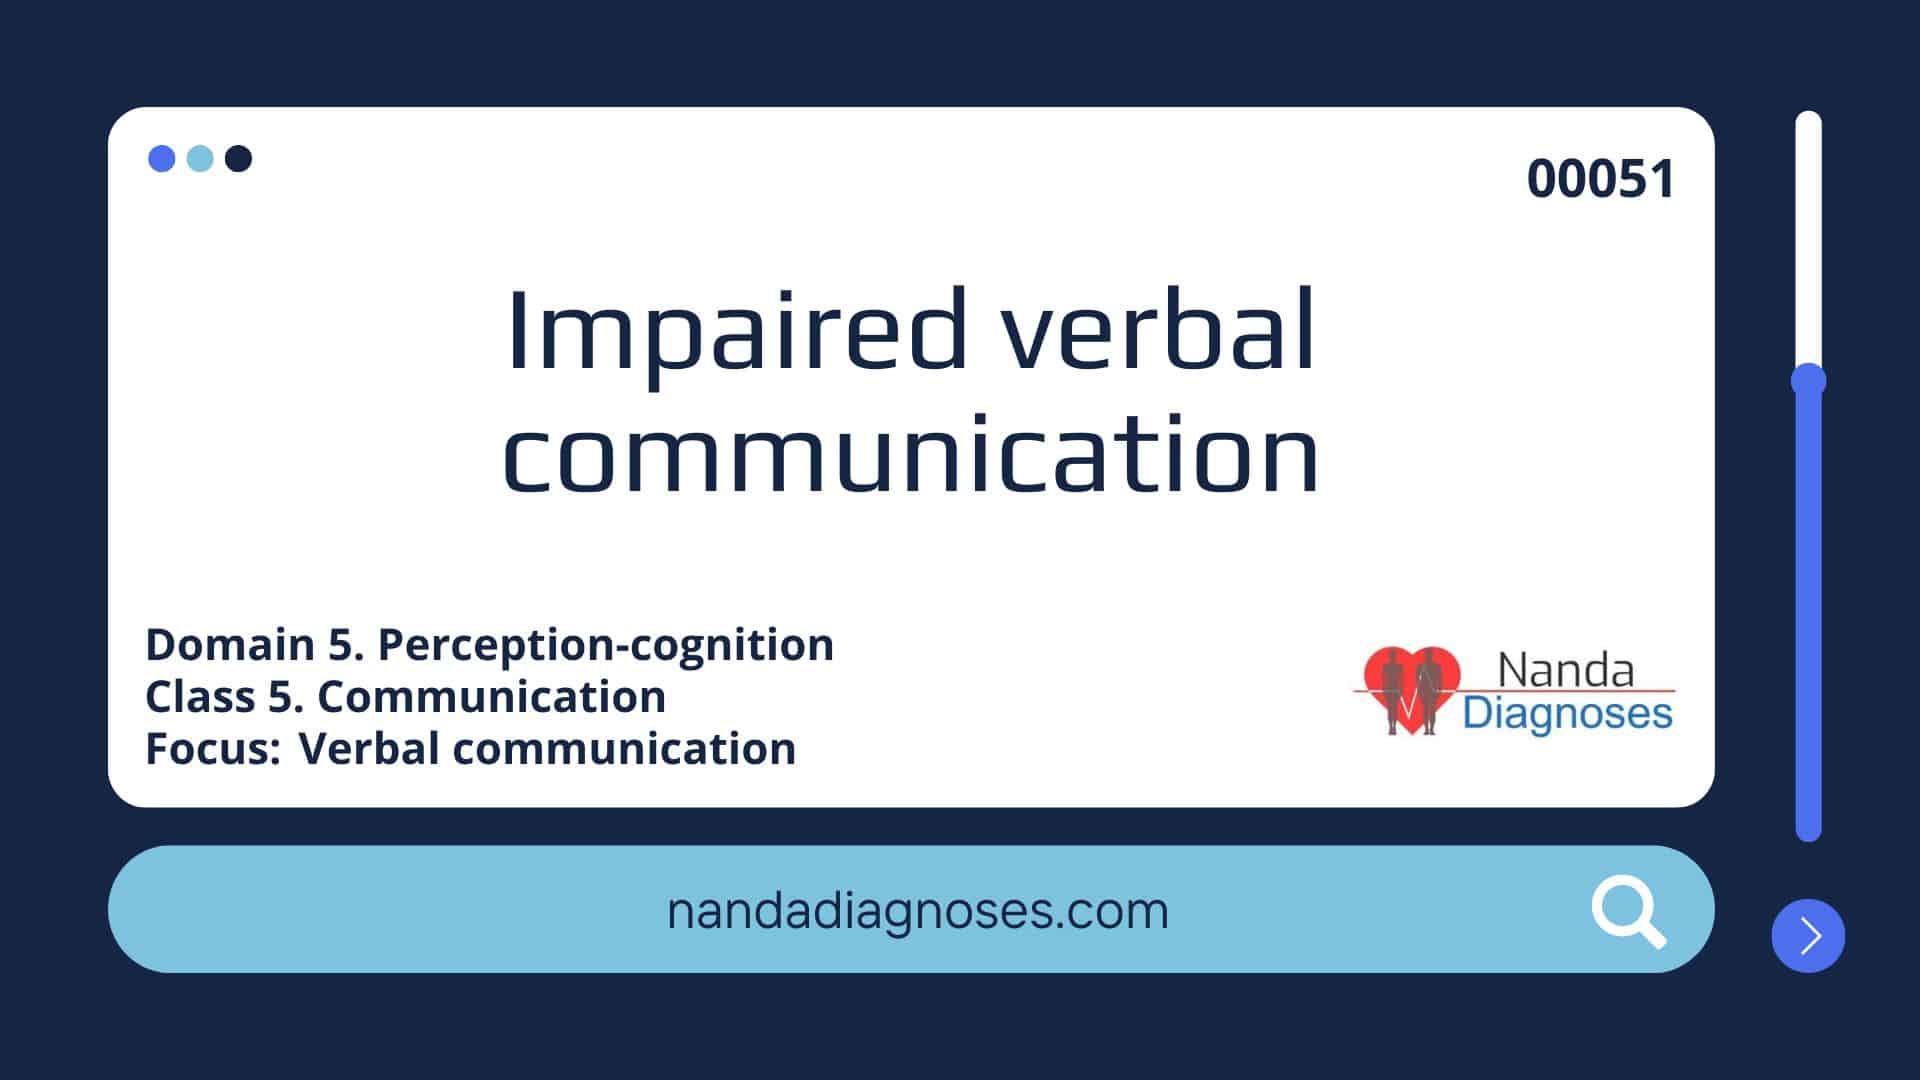 Impaired verbal communication